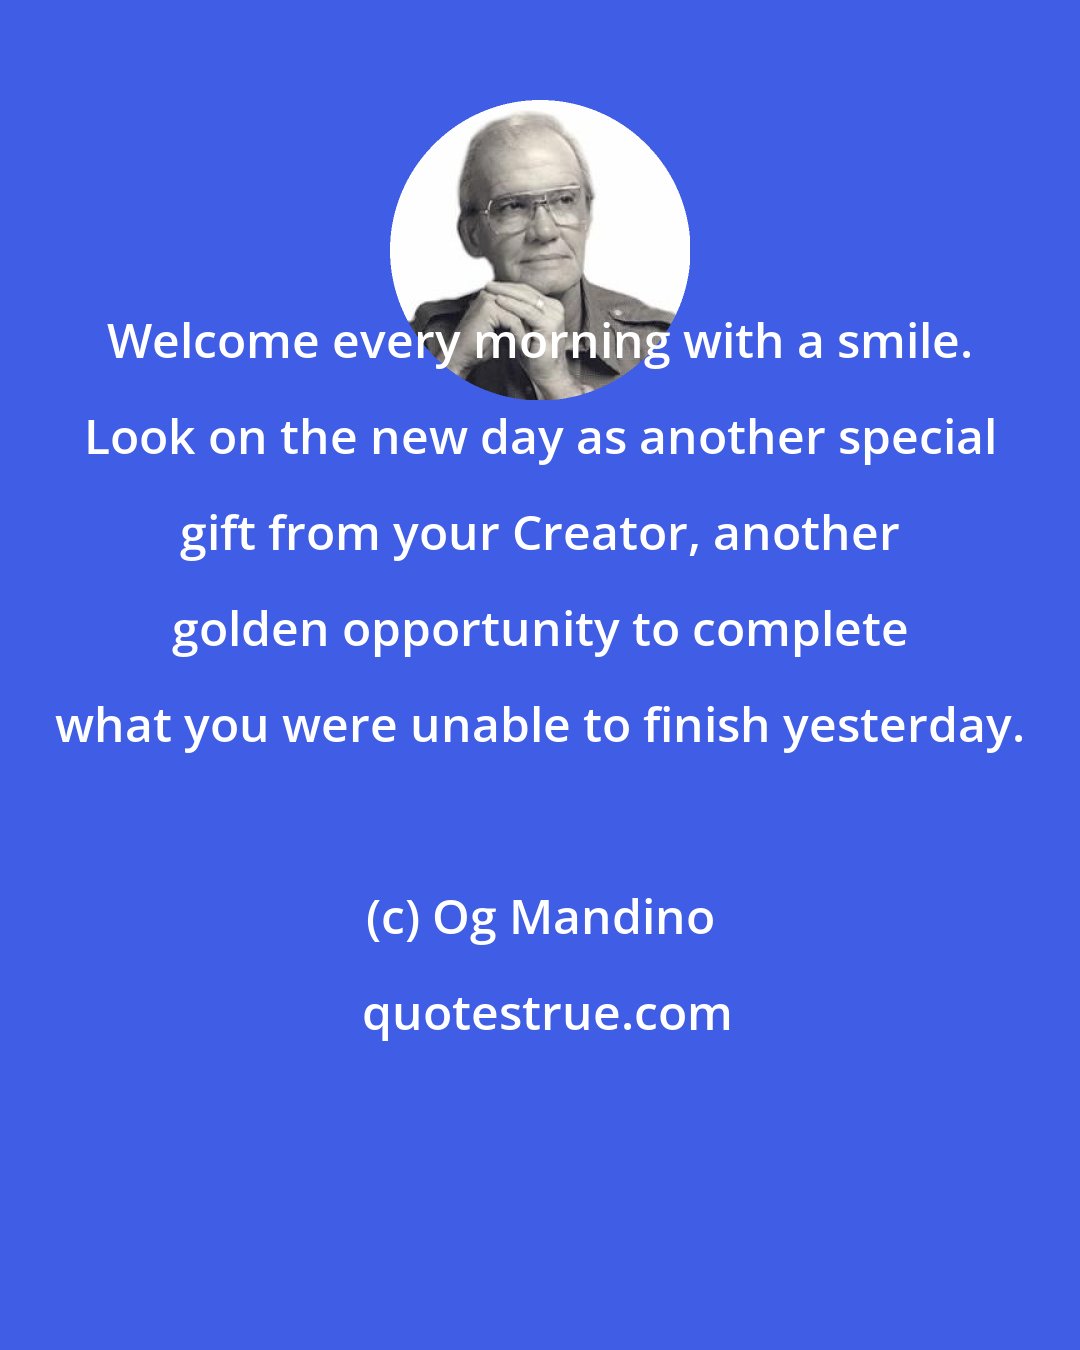 Og Mandino: Welcome every morning with a smile. Look on the new day as another special gift from your Creator, another golden opportunity to complete what you were unable to finish yesterday.